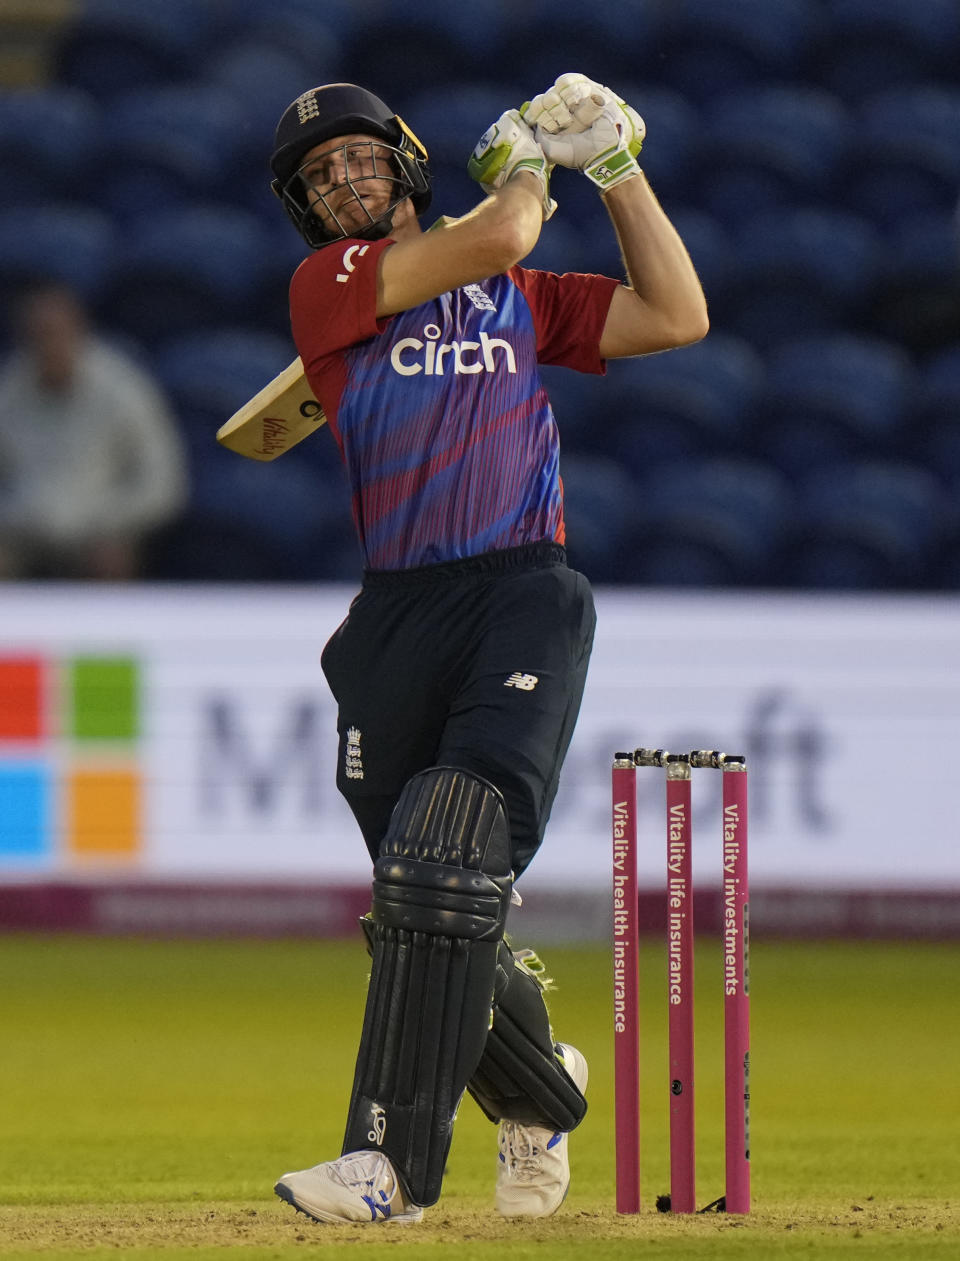 England's Jos Buttler hits the winning run during the T20 international cricket match between England and Sri Lanka at Cardiff, Wales, Wednesday, June 23, 2021. (AP Photo/Alastair Grant)